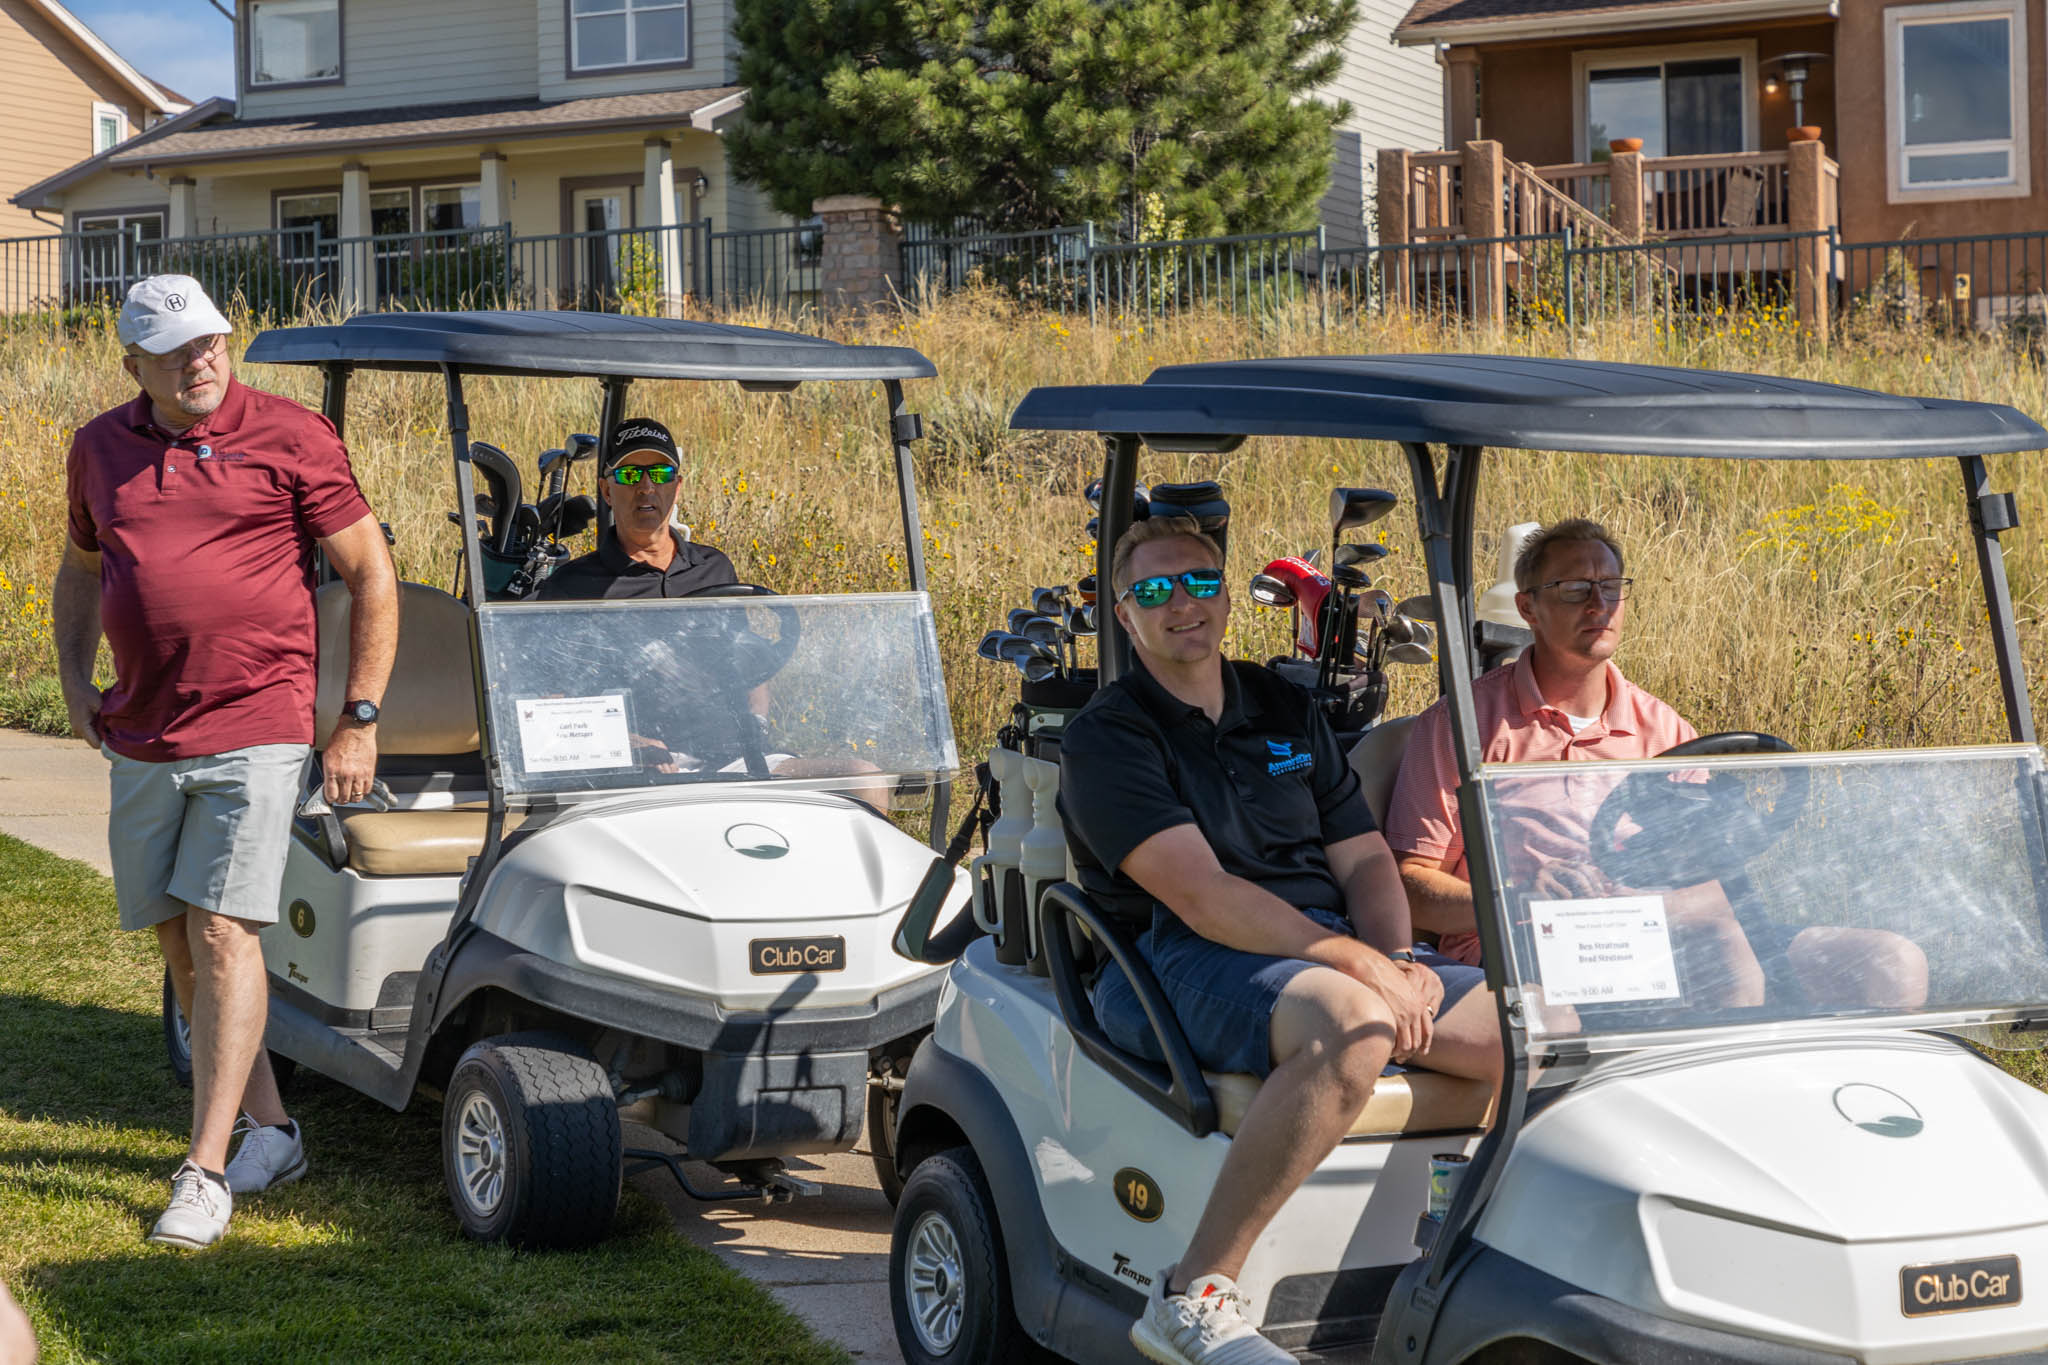 A group of people on golf carts.